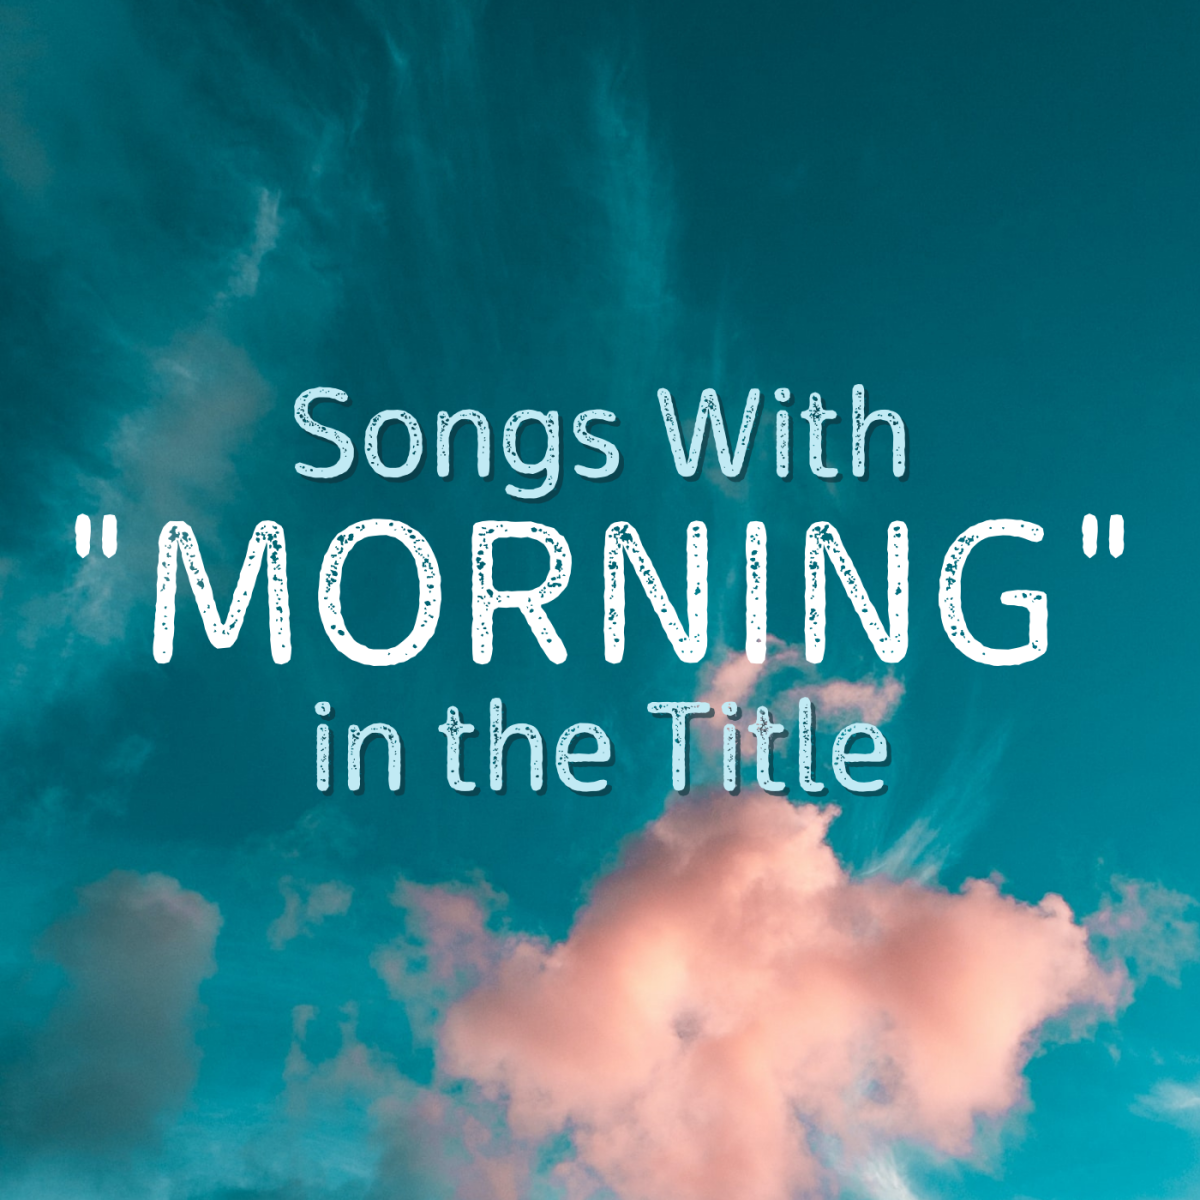 Fill up your morning playlist with these songs about the beginning of the day.